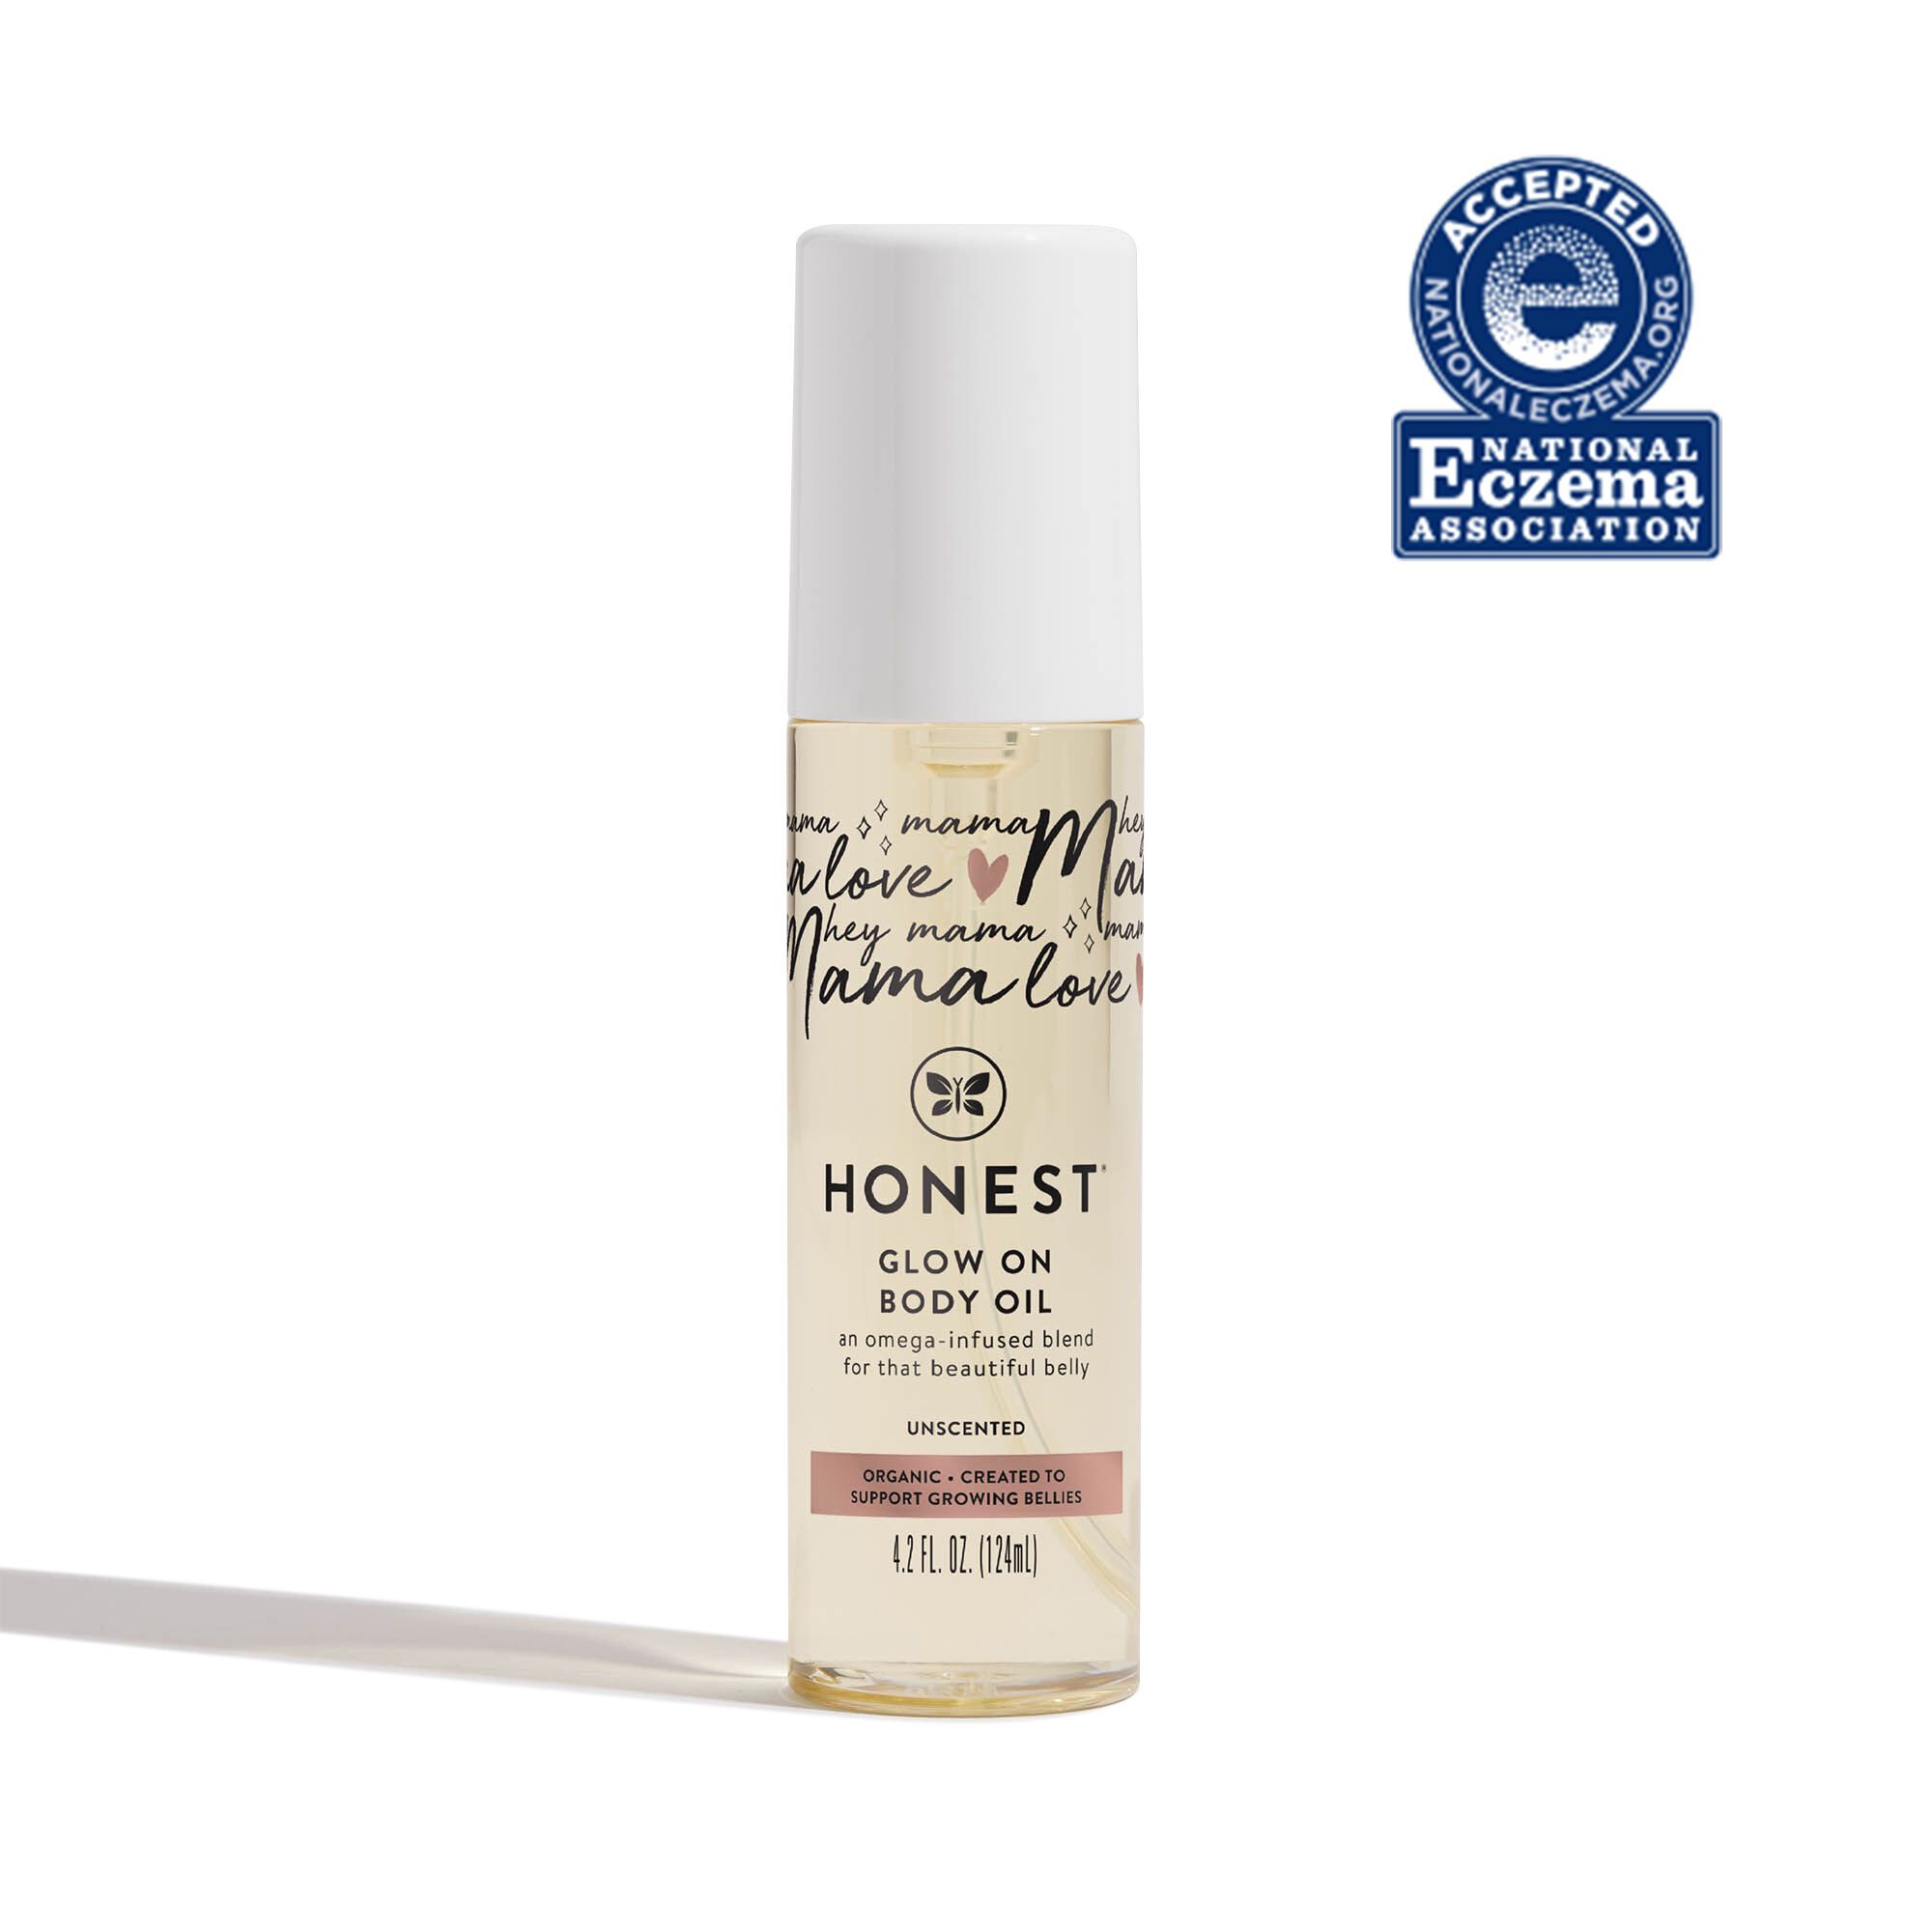 Glow On Body Oil | The Honest Company